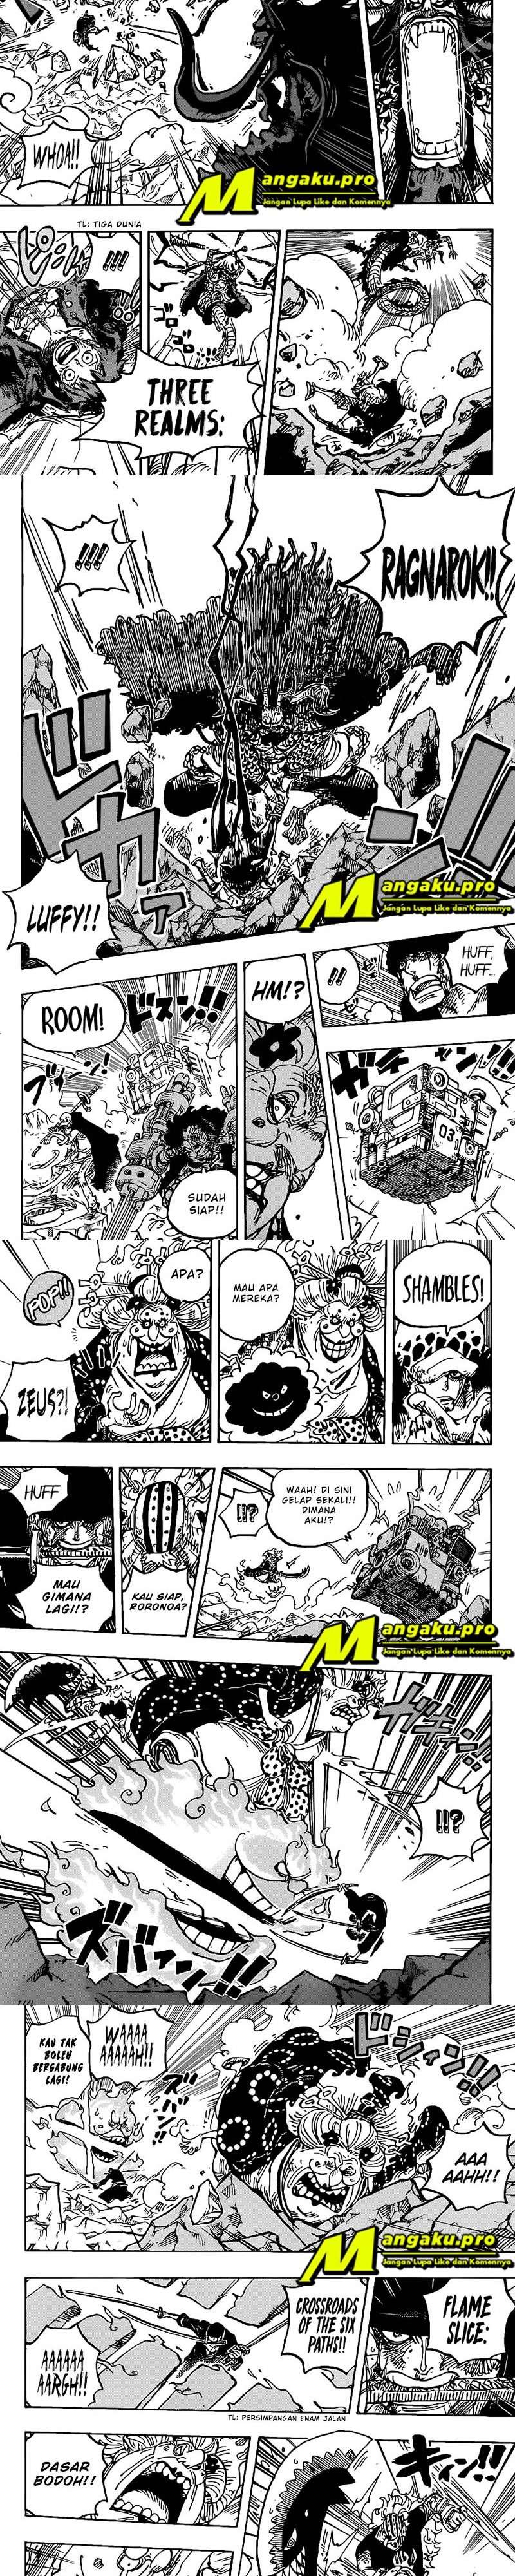 One Piece Chapter 1009 hq